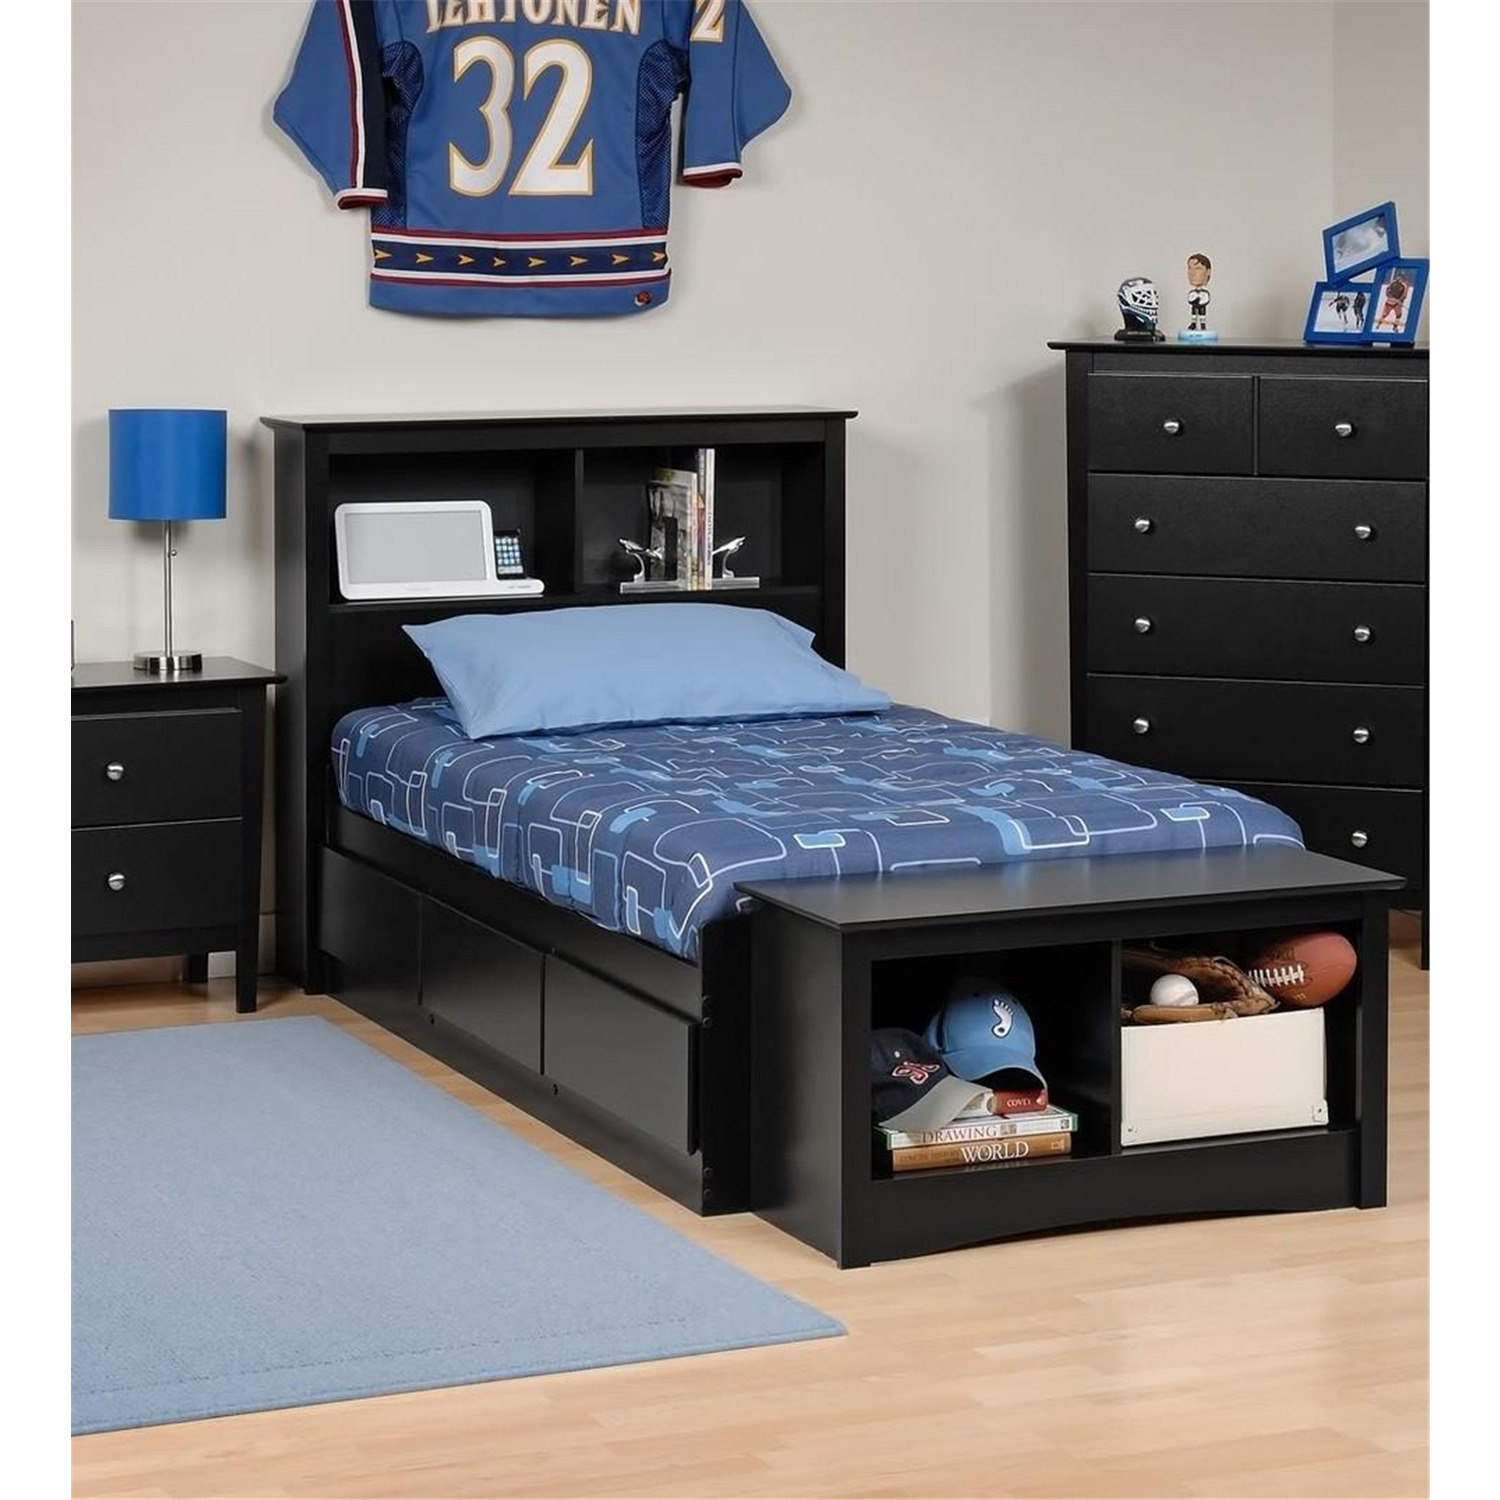 Platform Bed With Drawers Visualhunt, Twin Xl Platform Bed With Bookcase Headboard 3 Storage Drawers